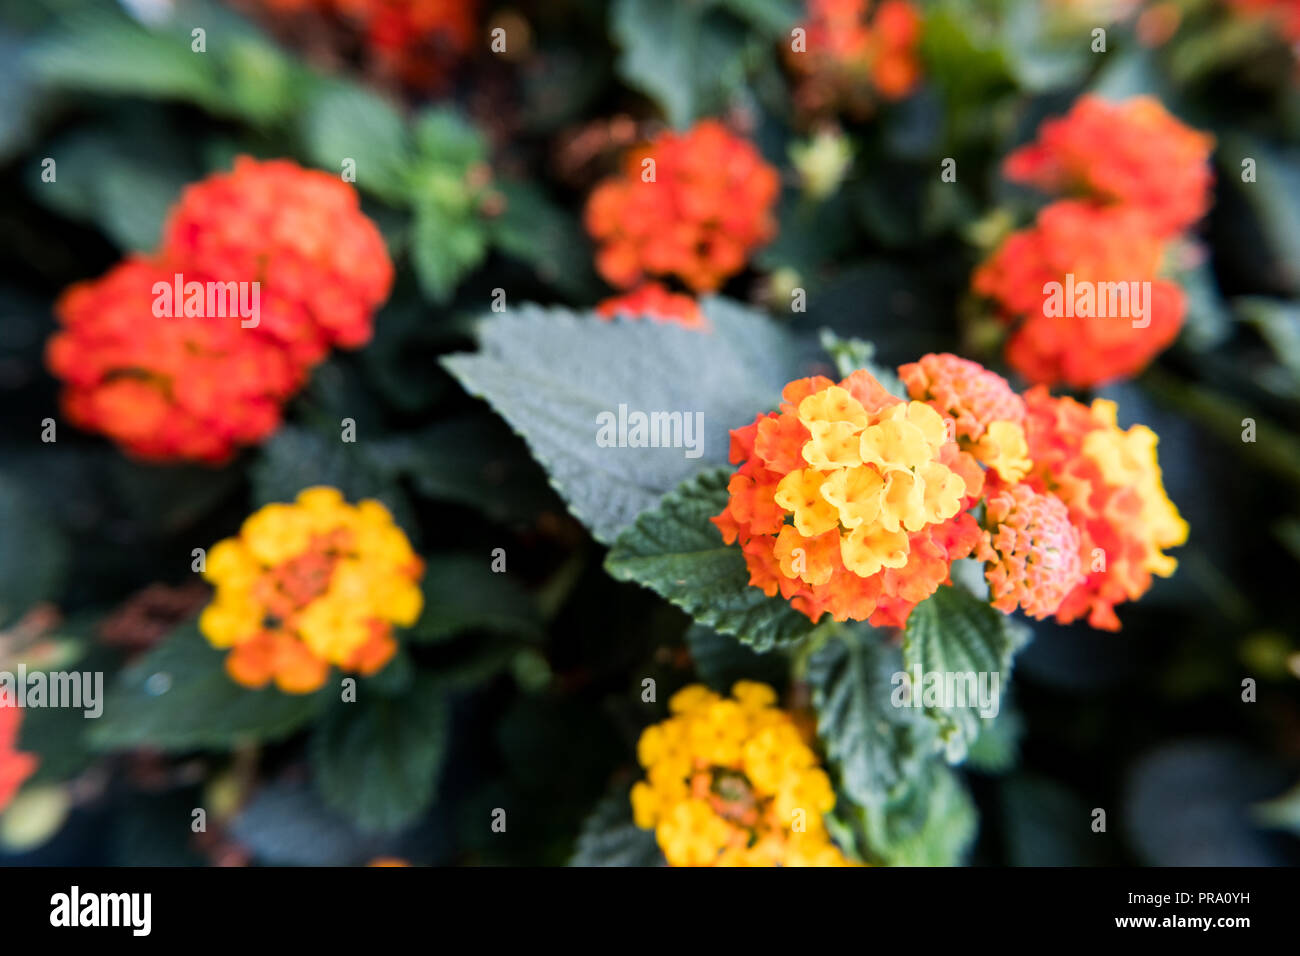 Nature flower wallpaper background red and yellow Lantana Camara also known as Big-sage, Wild-sage, Hedge Flower, Weeping Lantana, Lantana Camara Linn Stock Photo